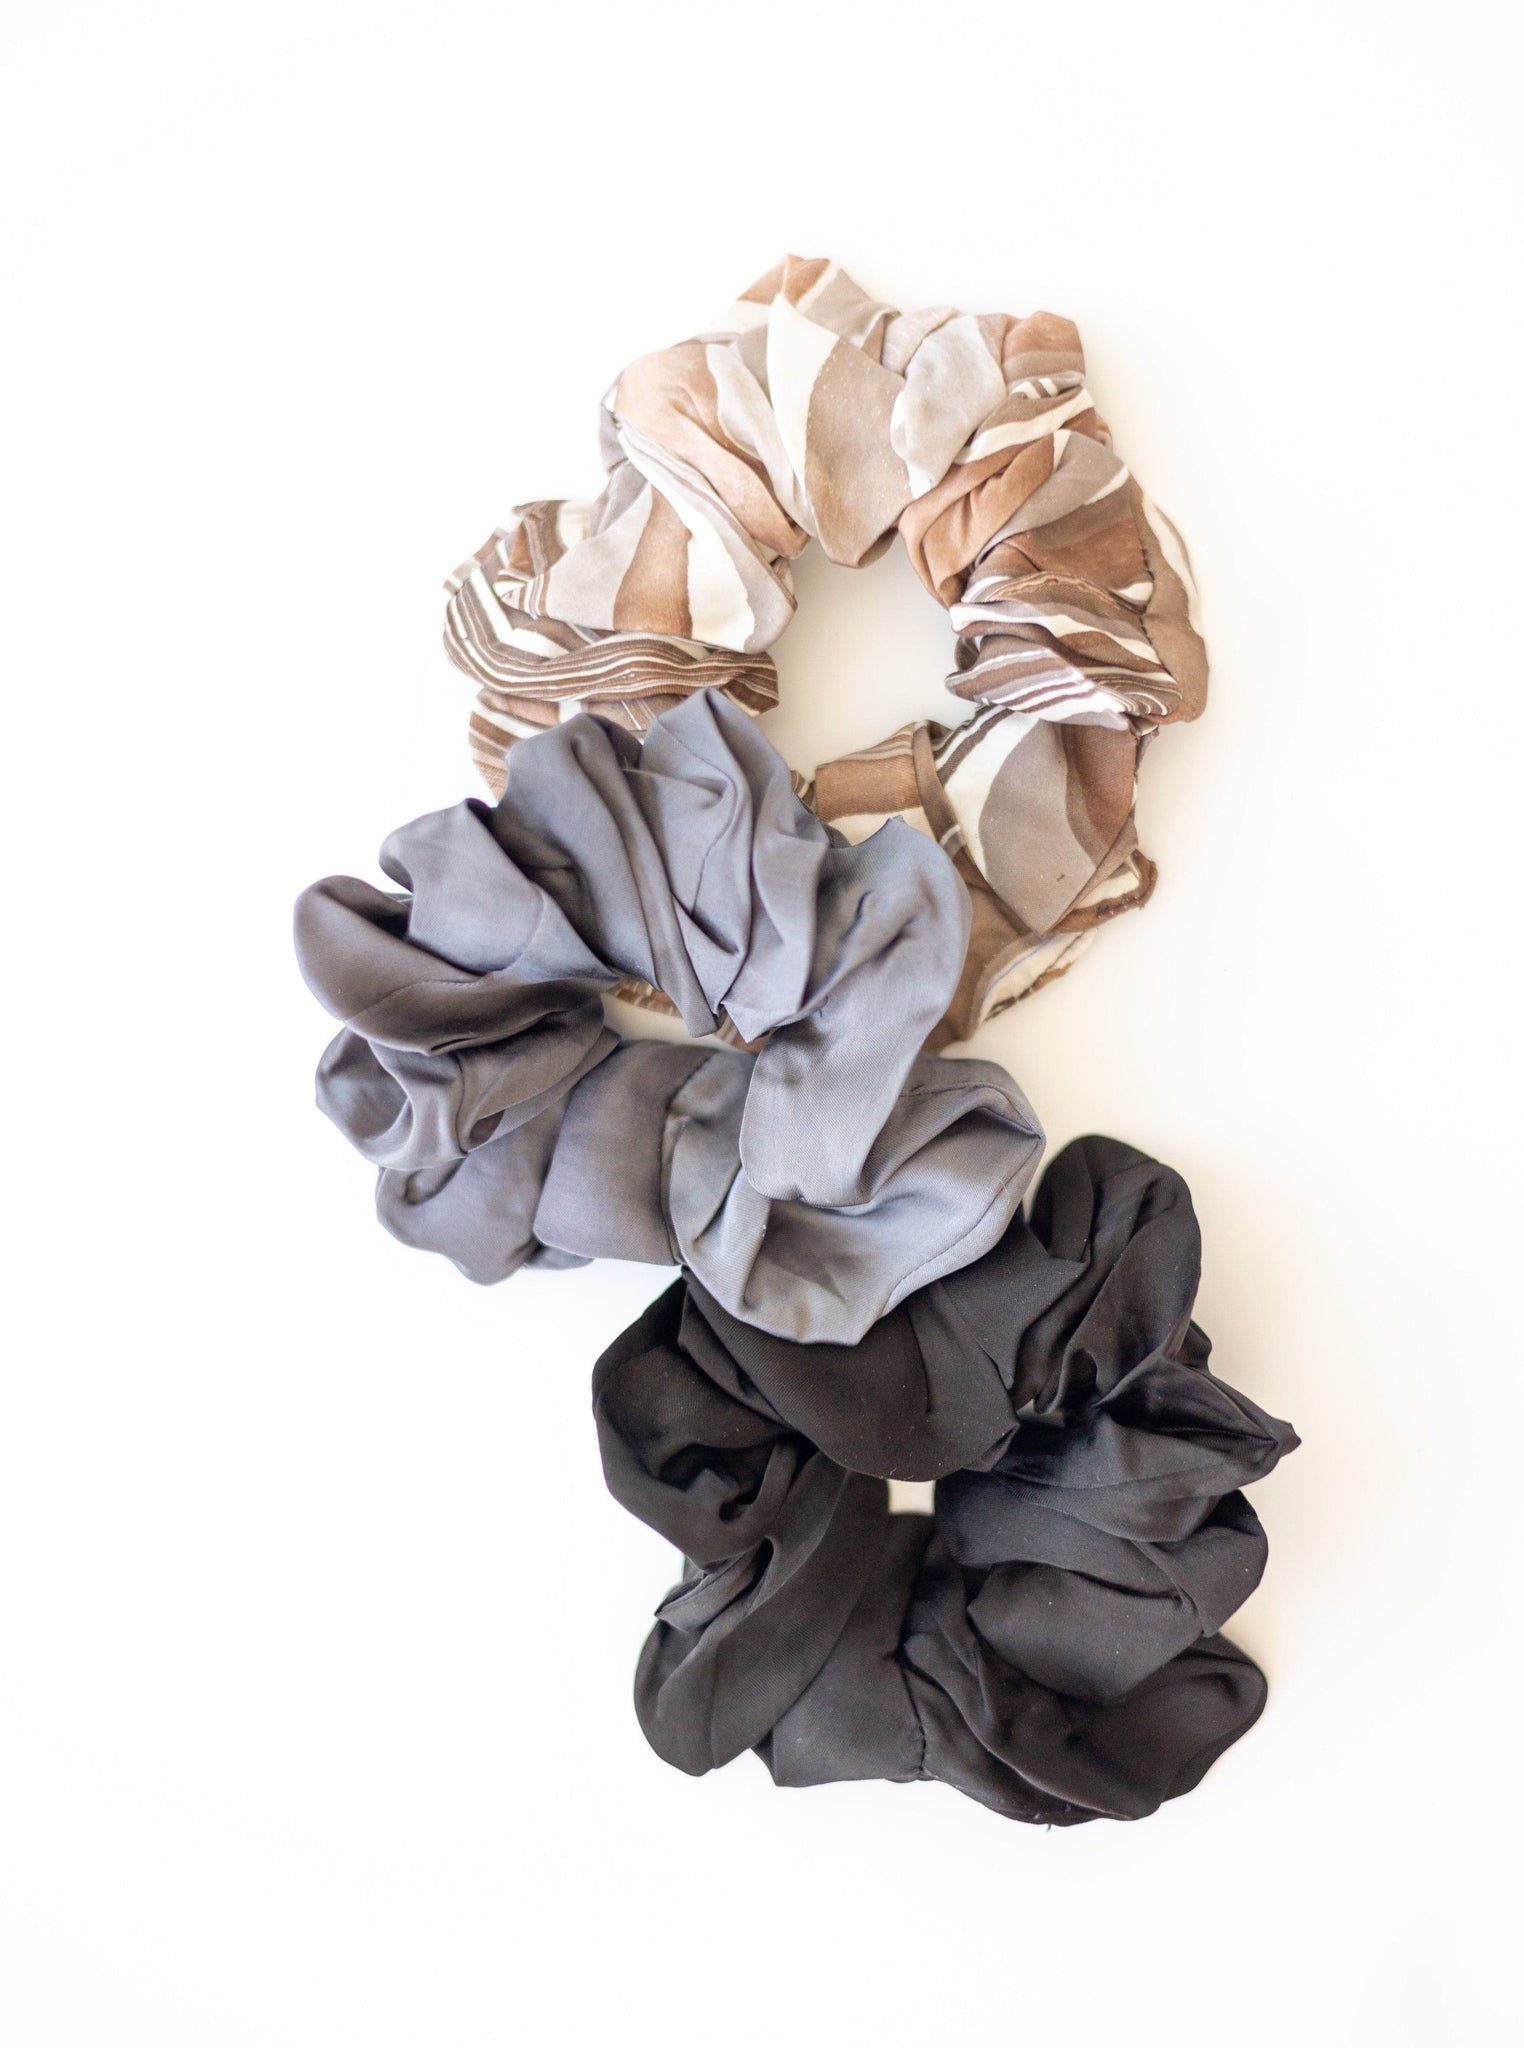 Three Small Scrunchies (set of 3) made from remnant fabrics, featured in an apparel collection, displayed on a white surface.